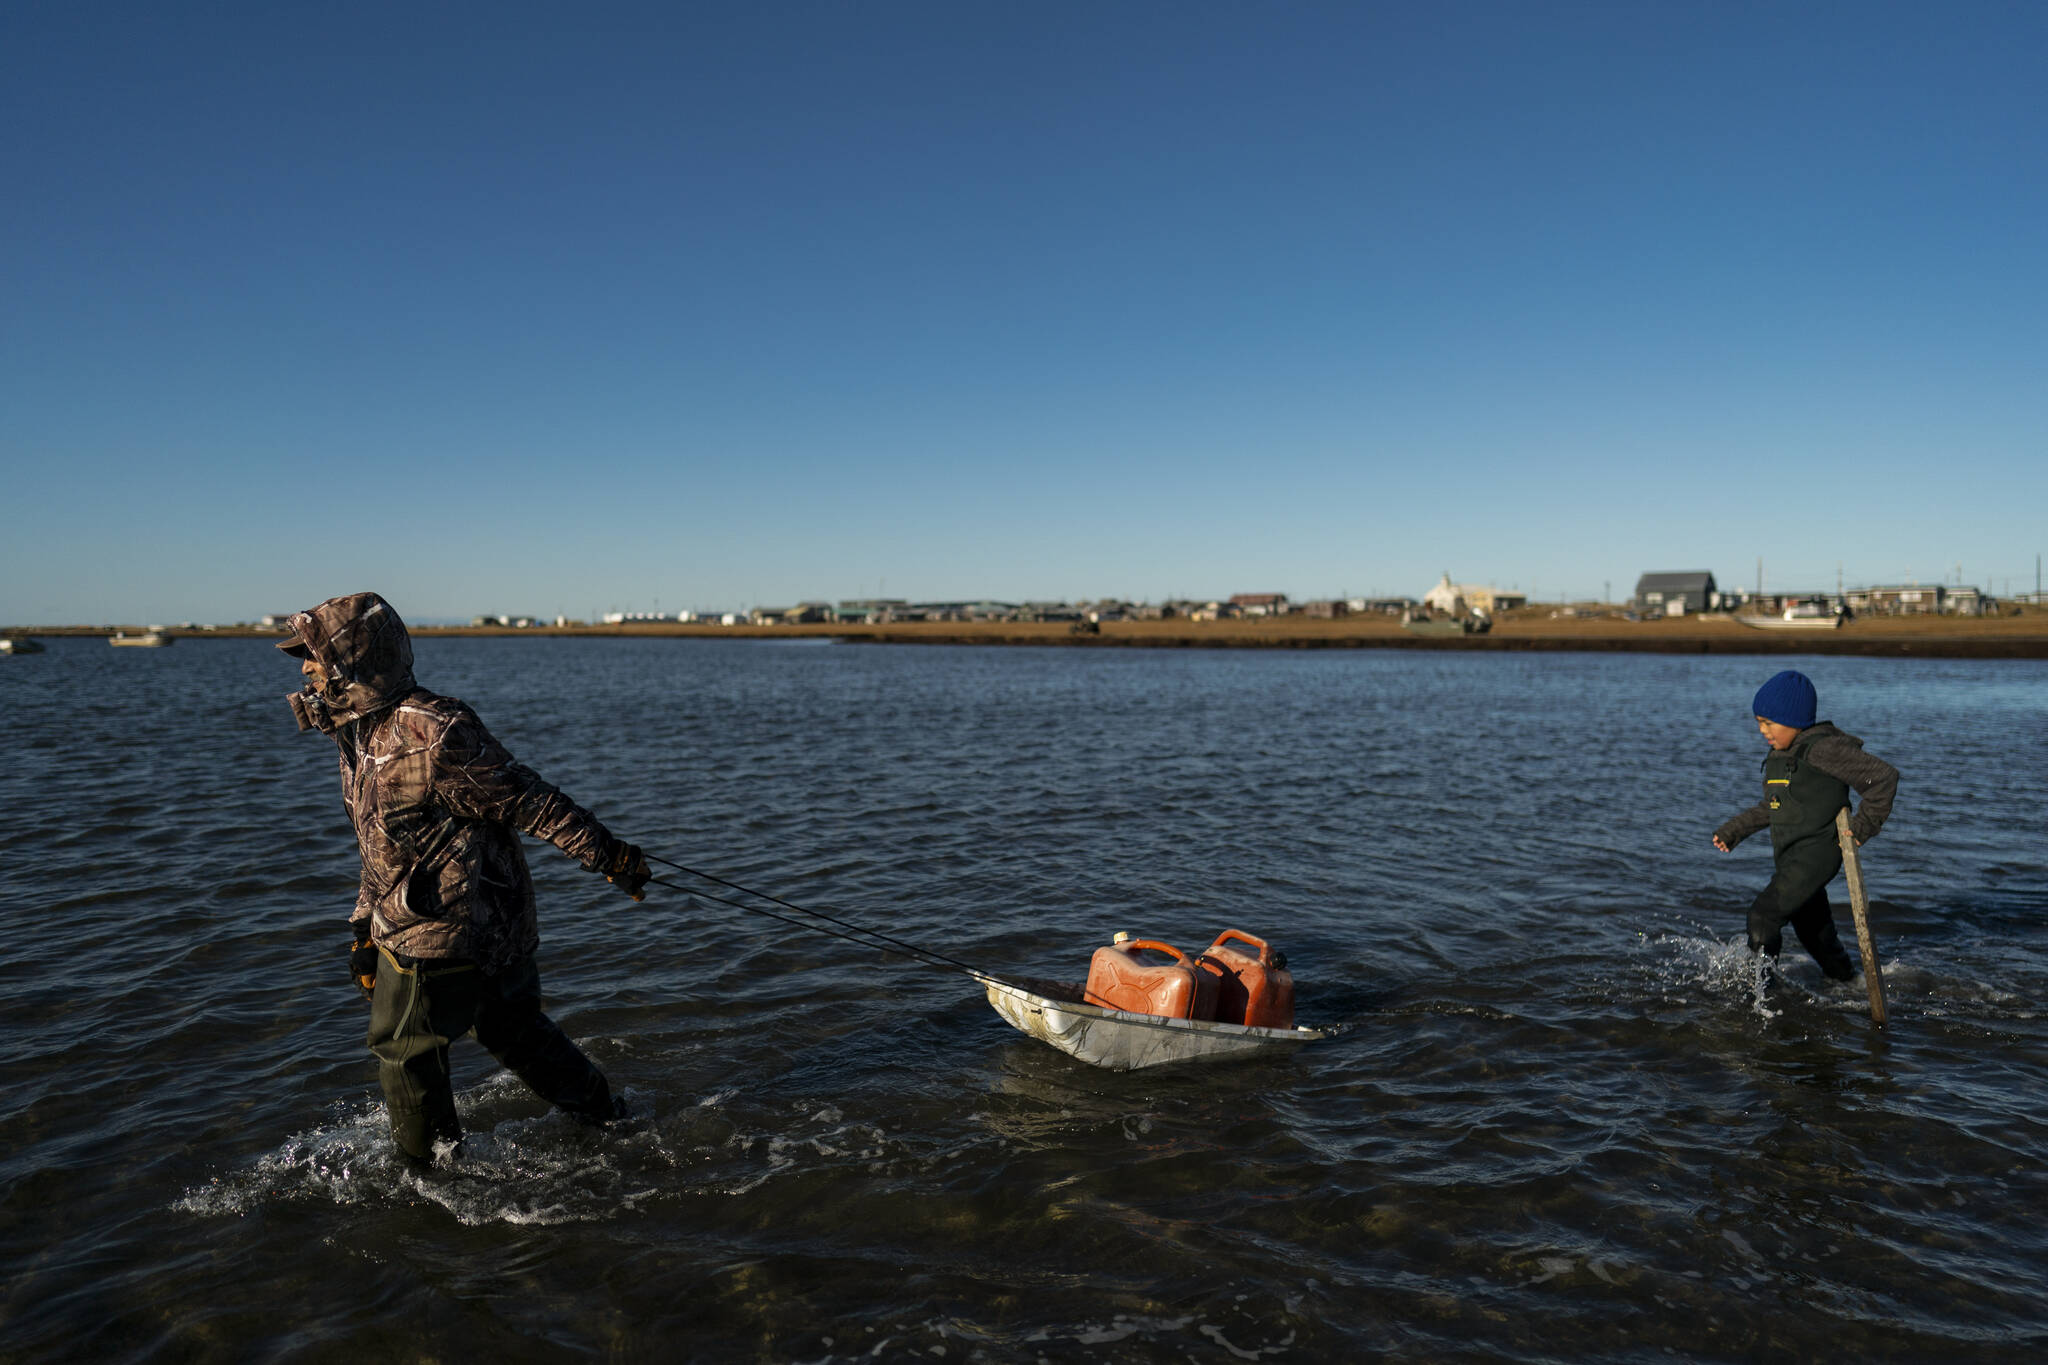 AP Photo / Jae C. Hong 
Pulling a sled with fuel containers in the lagoon, Joe Eningowuk, 62, left, and his 7-year-old grandson, Isaiah Kakoona, head toward their boat through the shallow water while getting ready for a two-day camping trip in Shishmaref, Alaska, Saturday, Oct. 1, 2022. Rising sea levels, flooding, increased erosion and loss of protective sea ice and land have led residents of this island community to vote twice to relocate. But more than six years after the last vote, Shishmaref remains in the same place because the relocation is too costly.